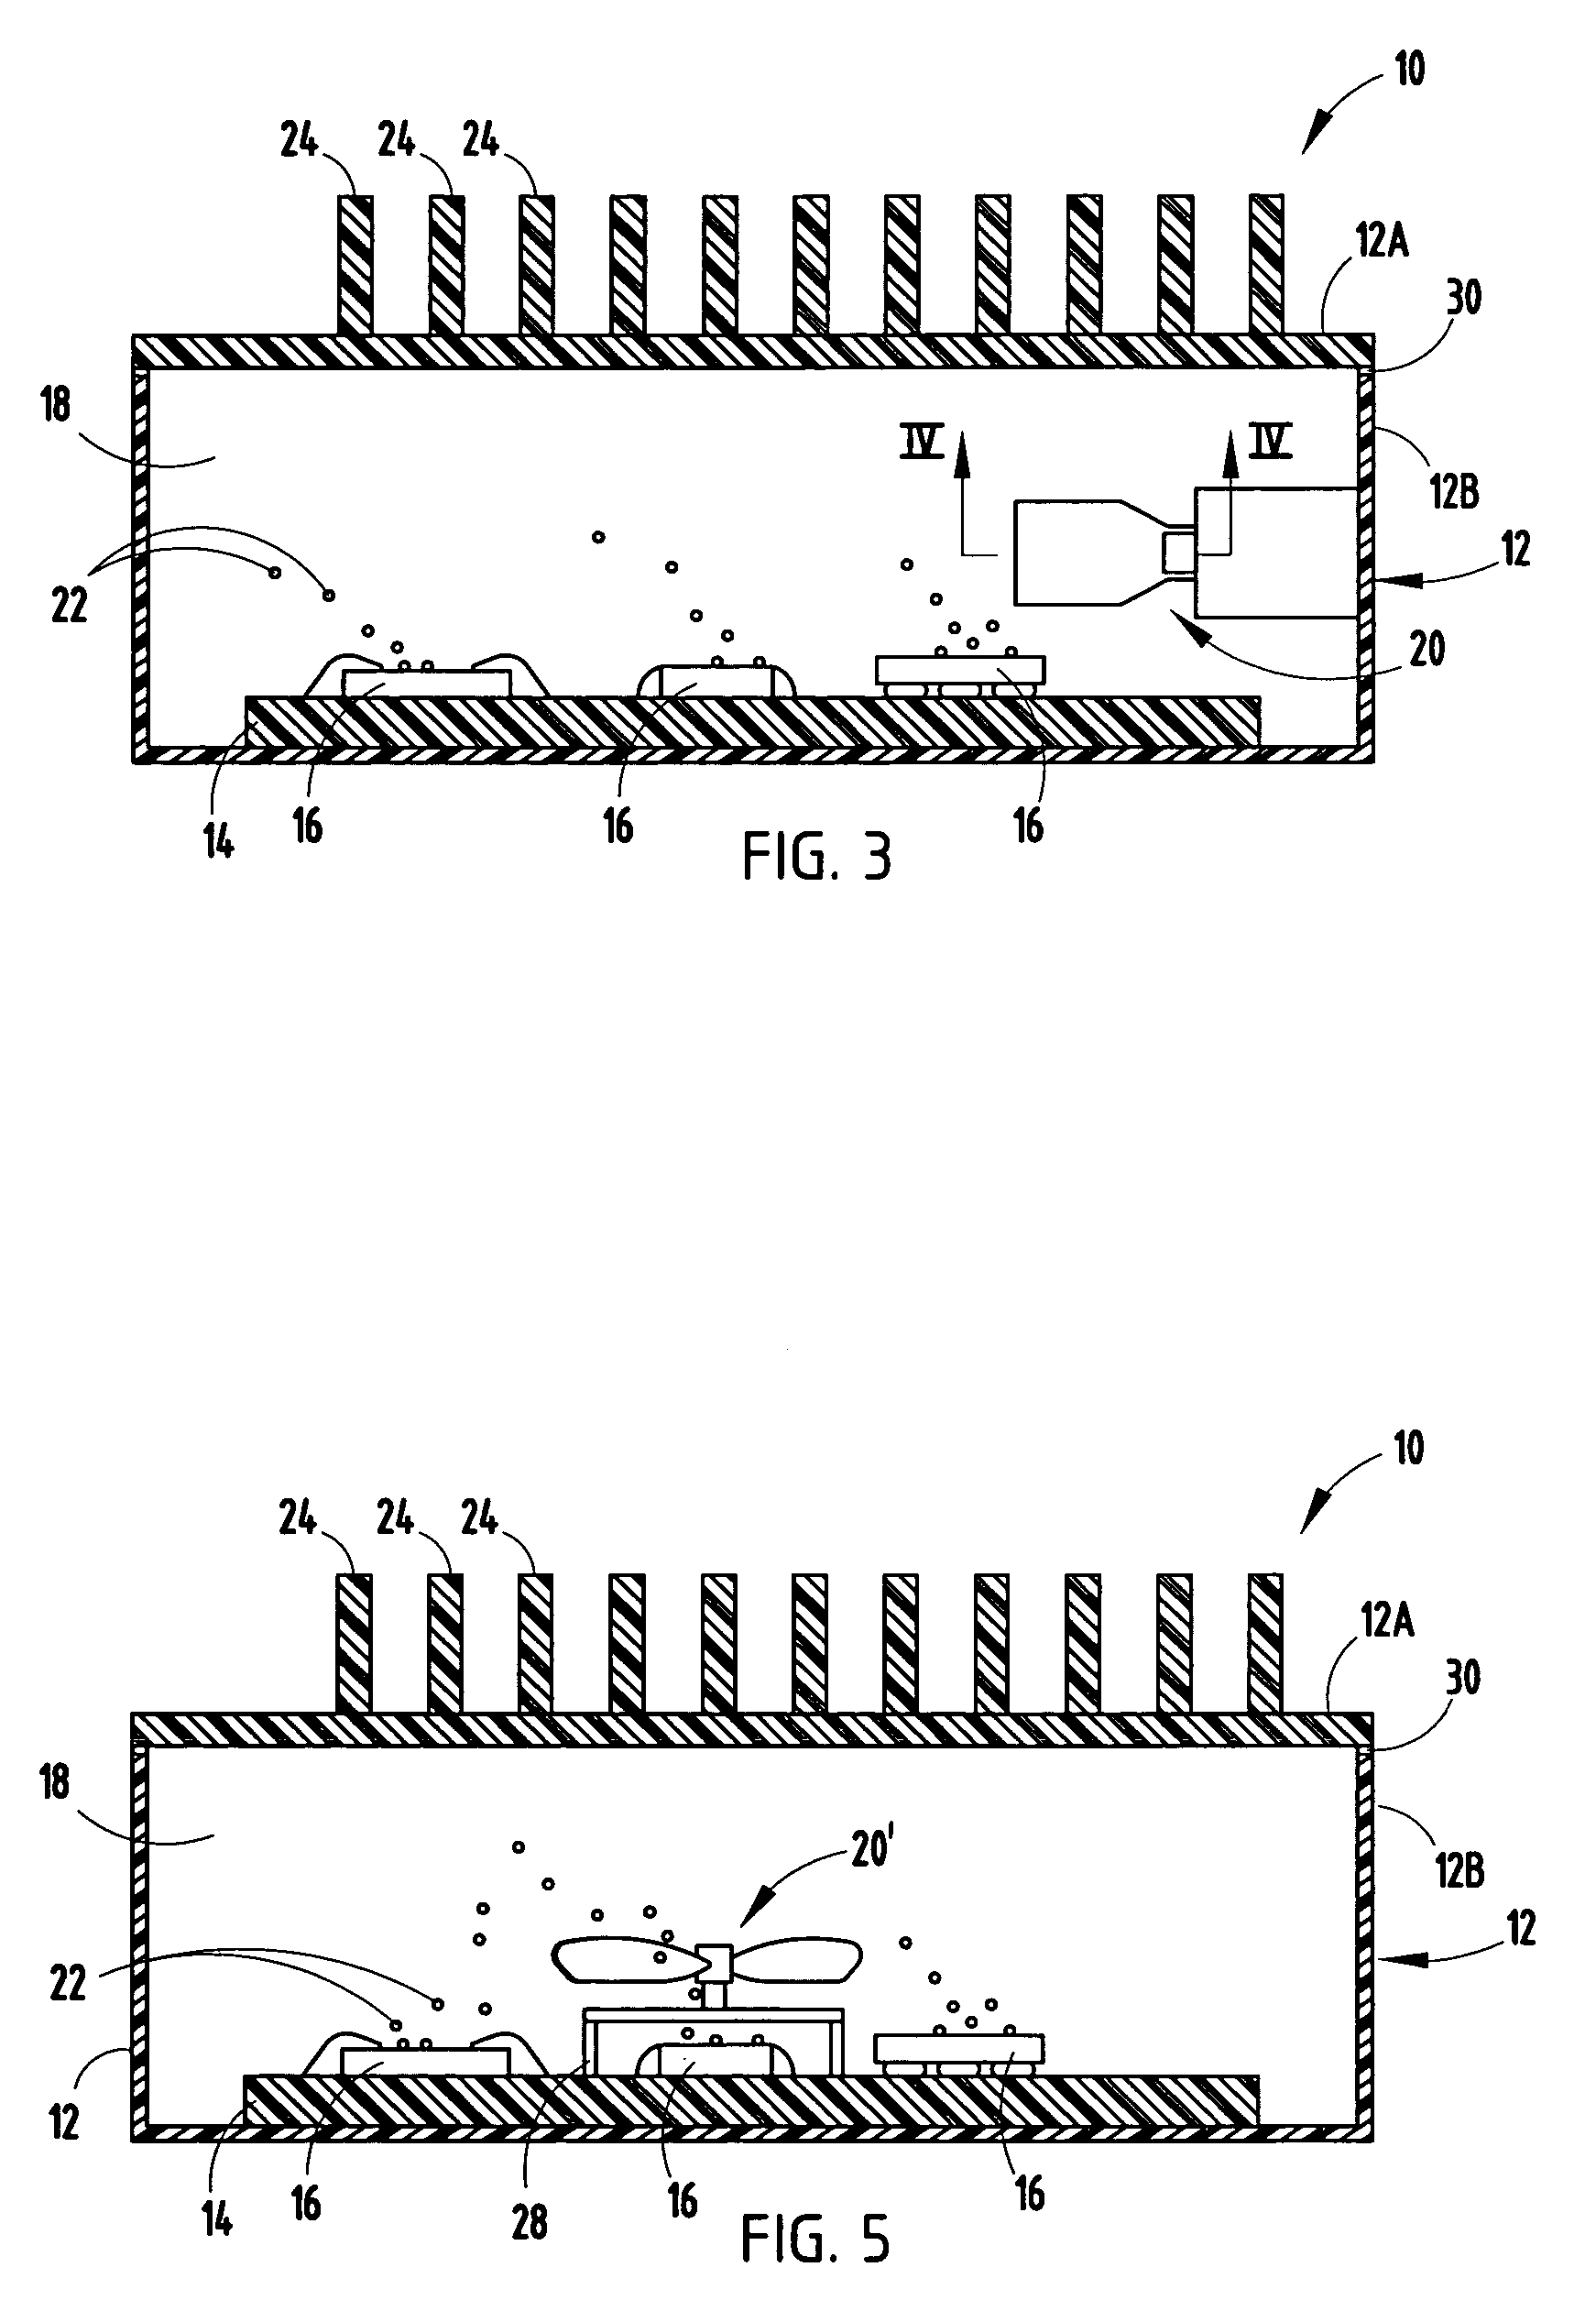 Electronic package and method of cooling electronics